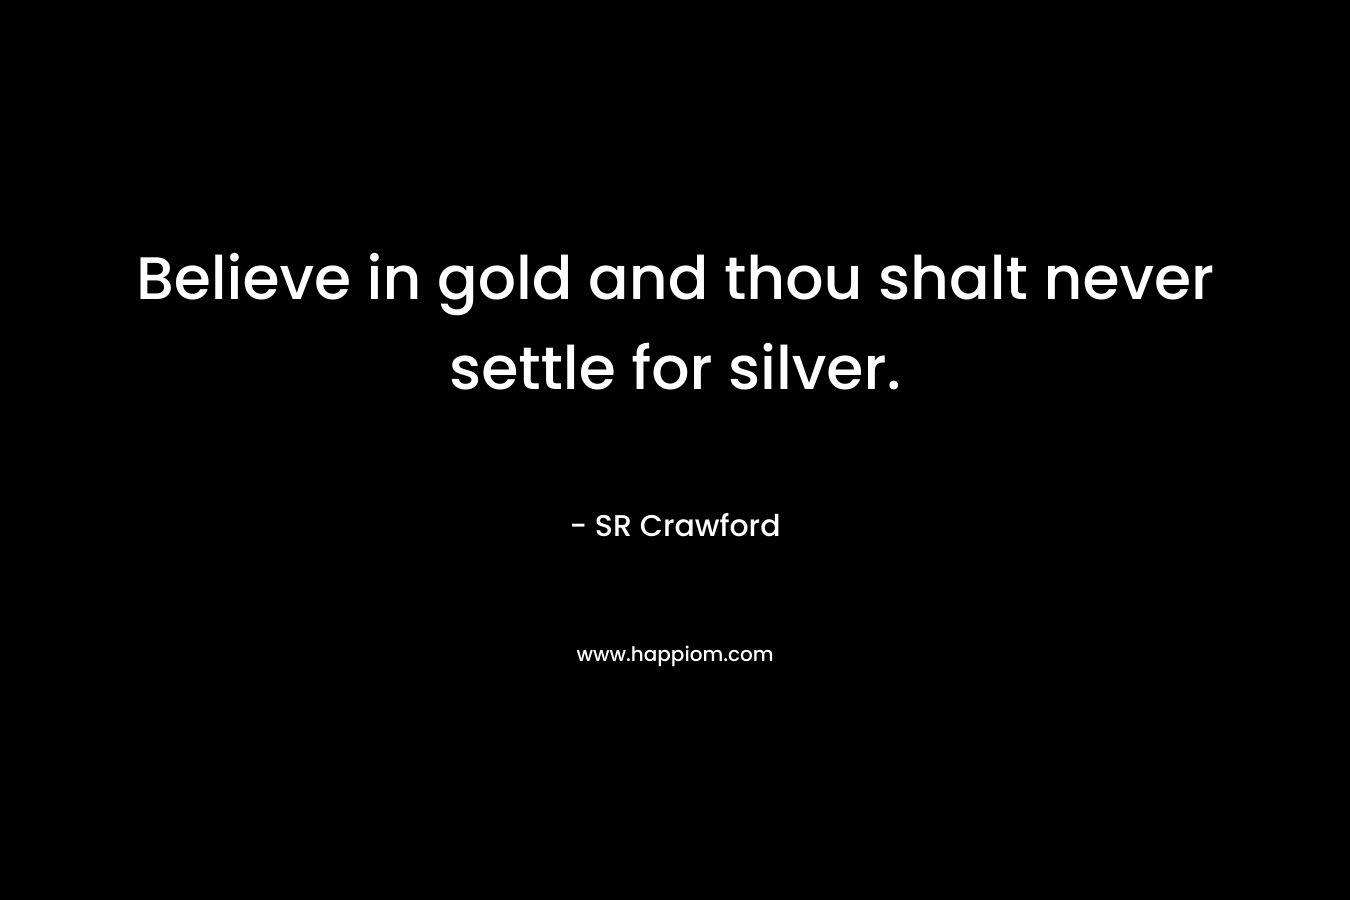 Believe in gold and thou shalt never settle for silver. – SR Crawford